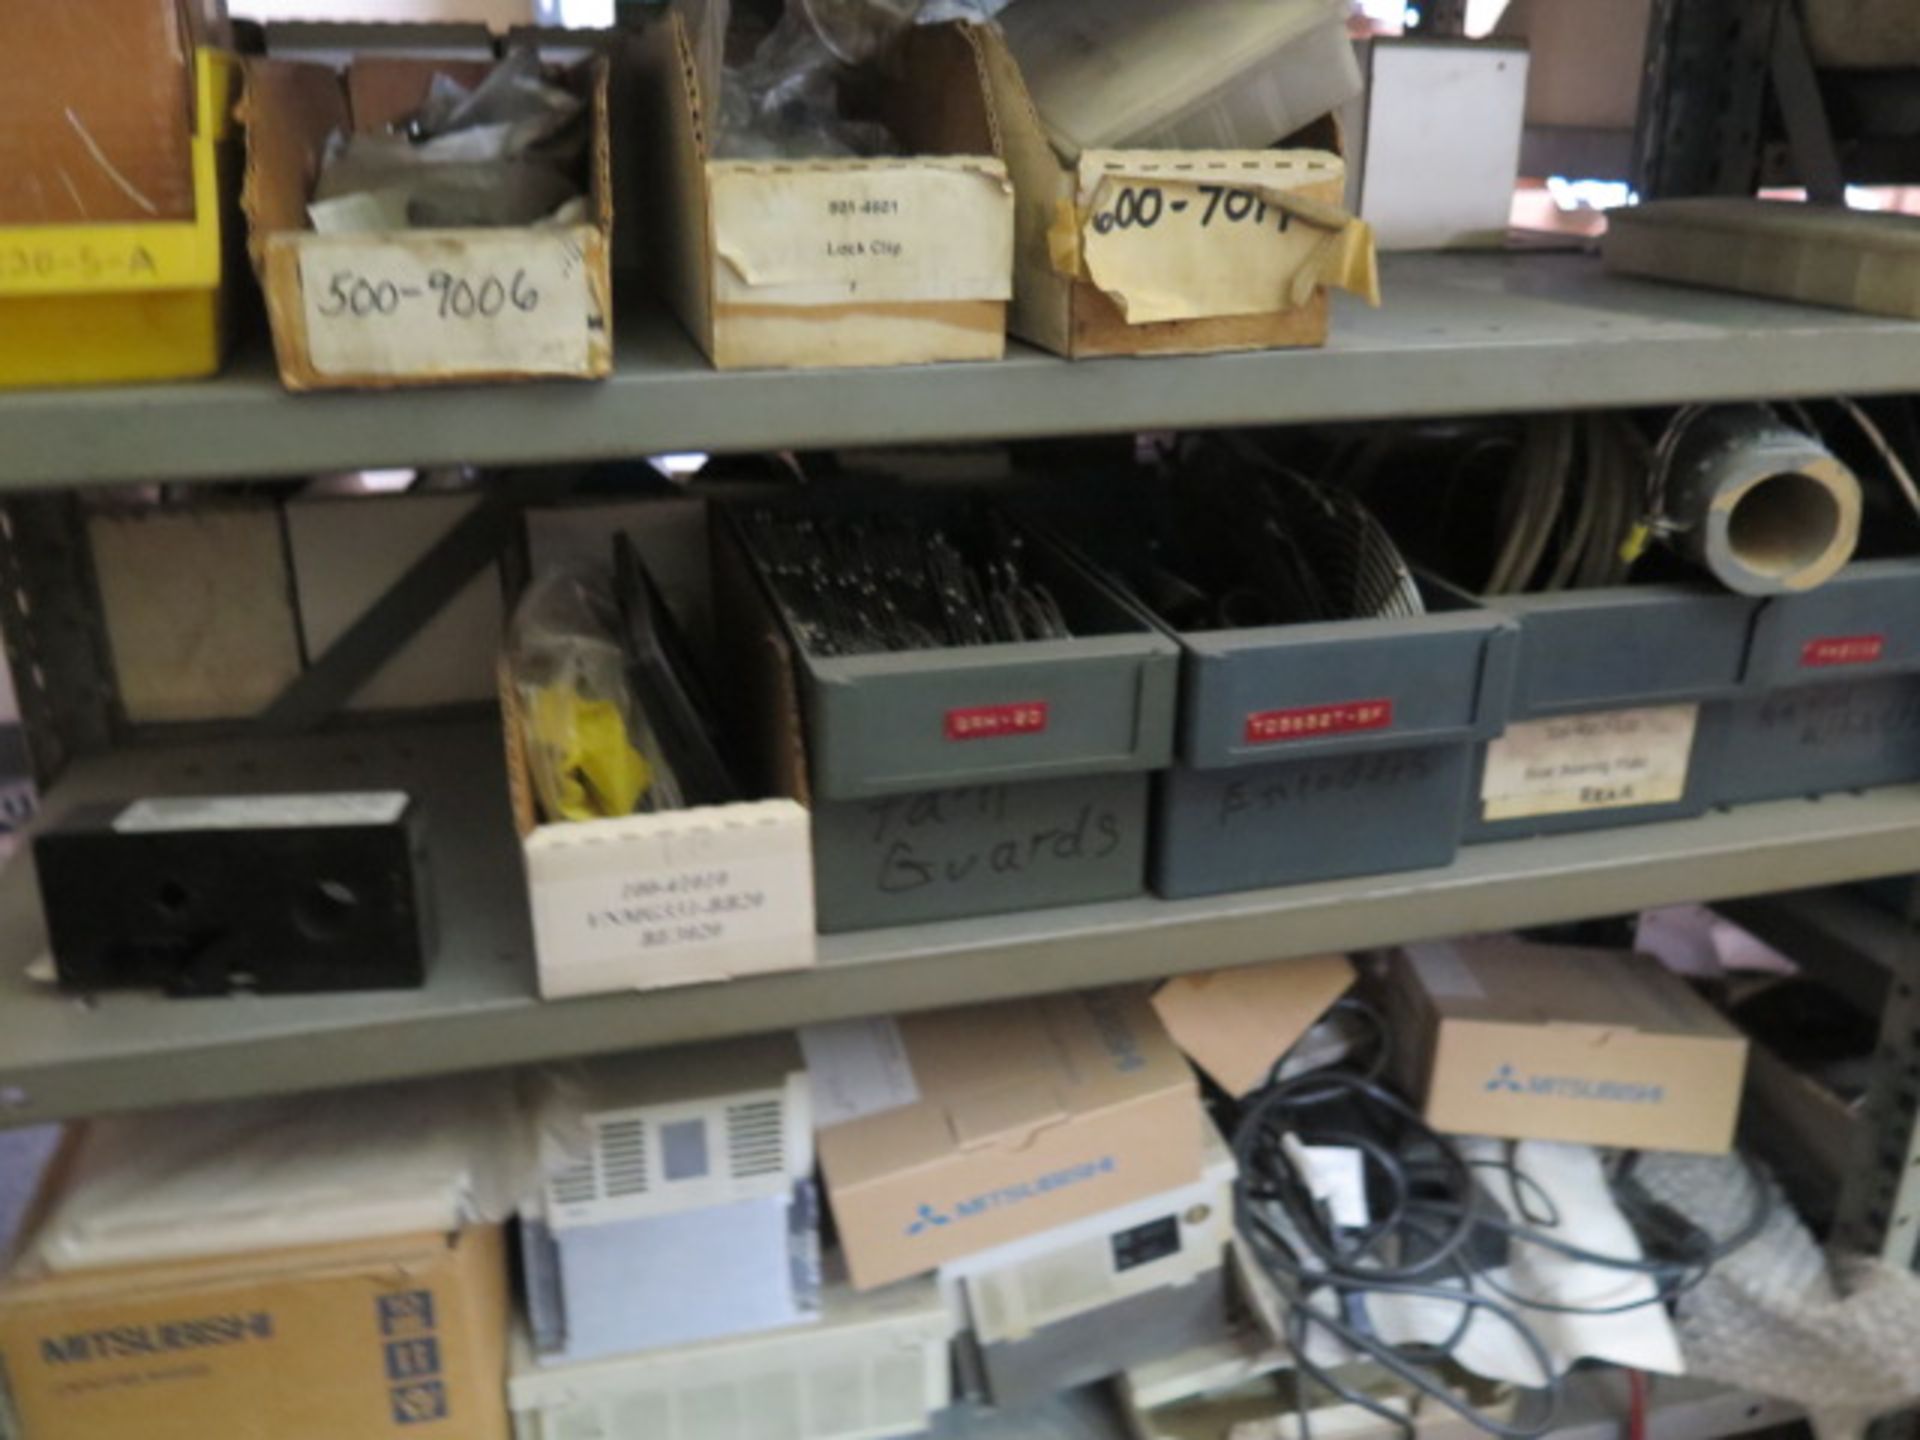 Large Quantity of Machine Replacement Parts Including Spindles, Bearings, Pneumatic Collet - Image 19 of 30